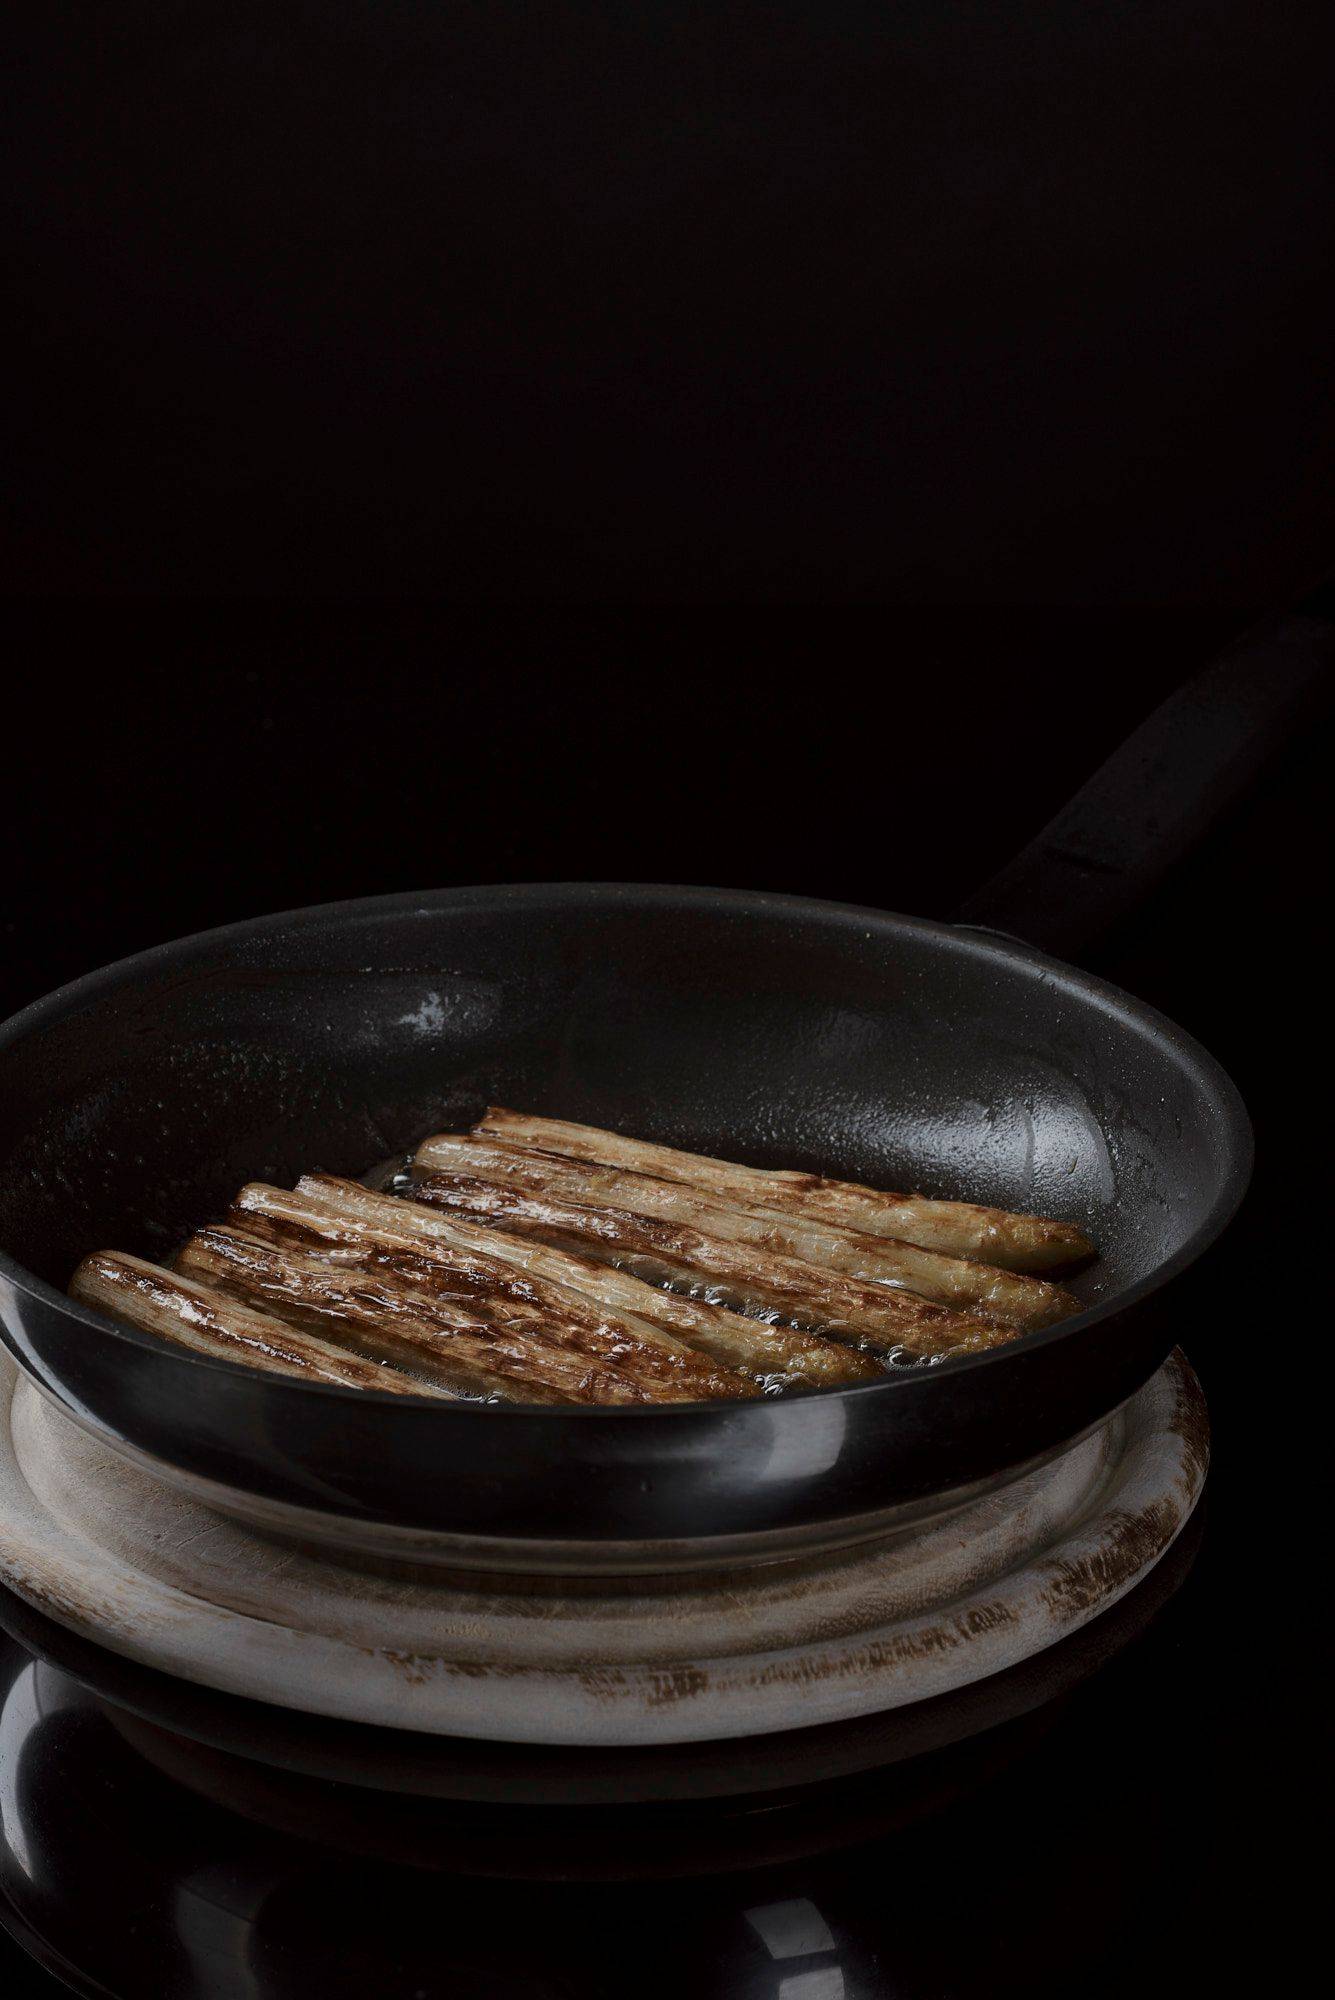 roasted asparagus in a frying pan with black background